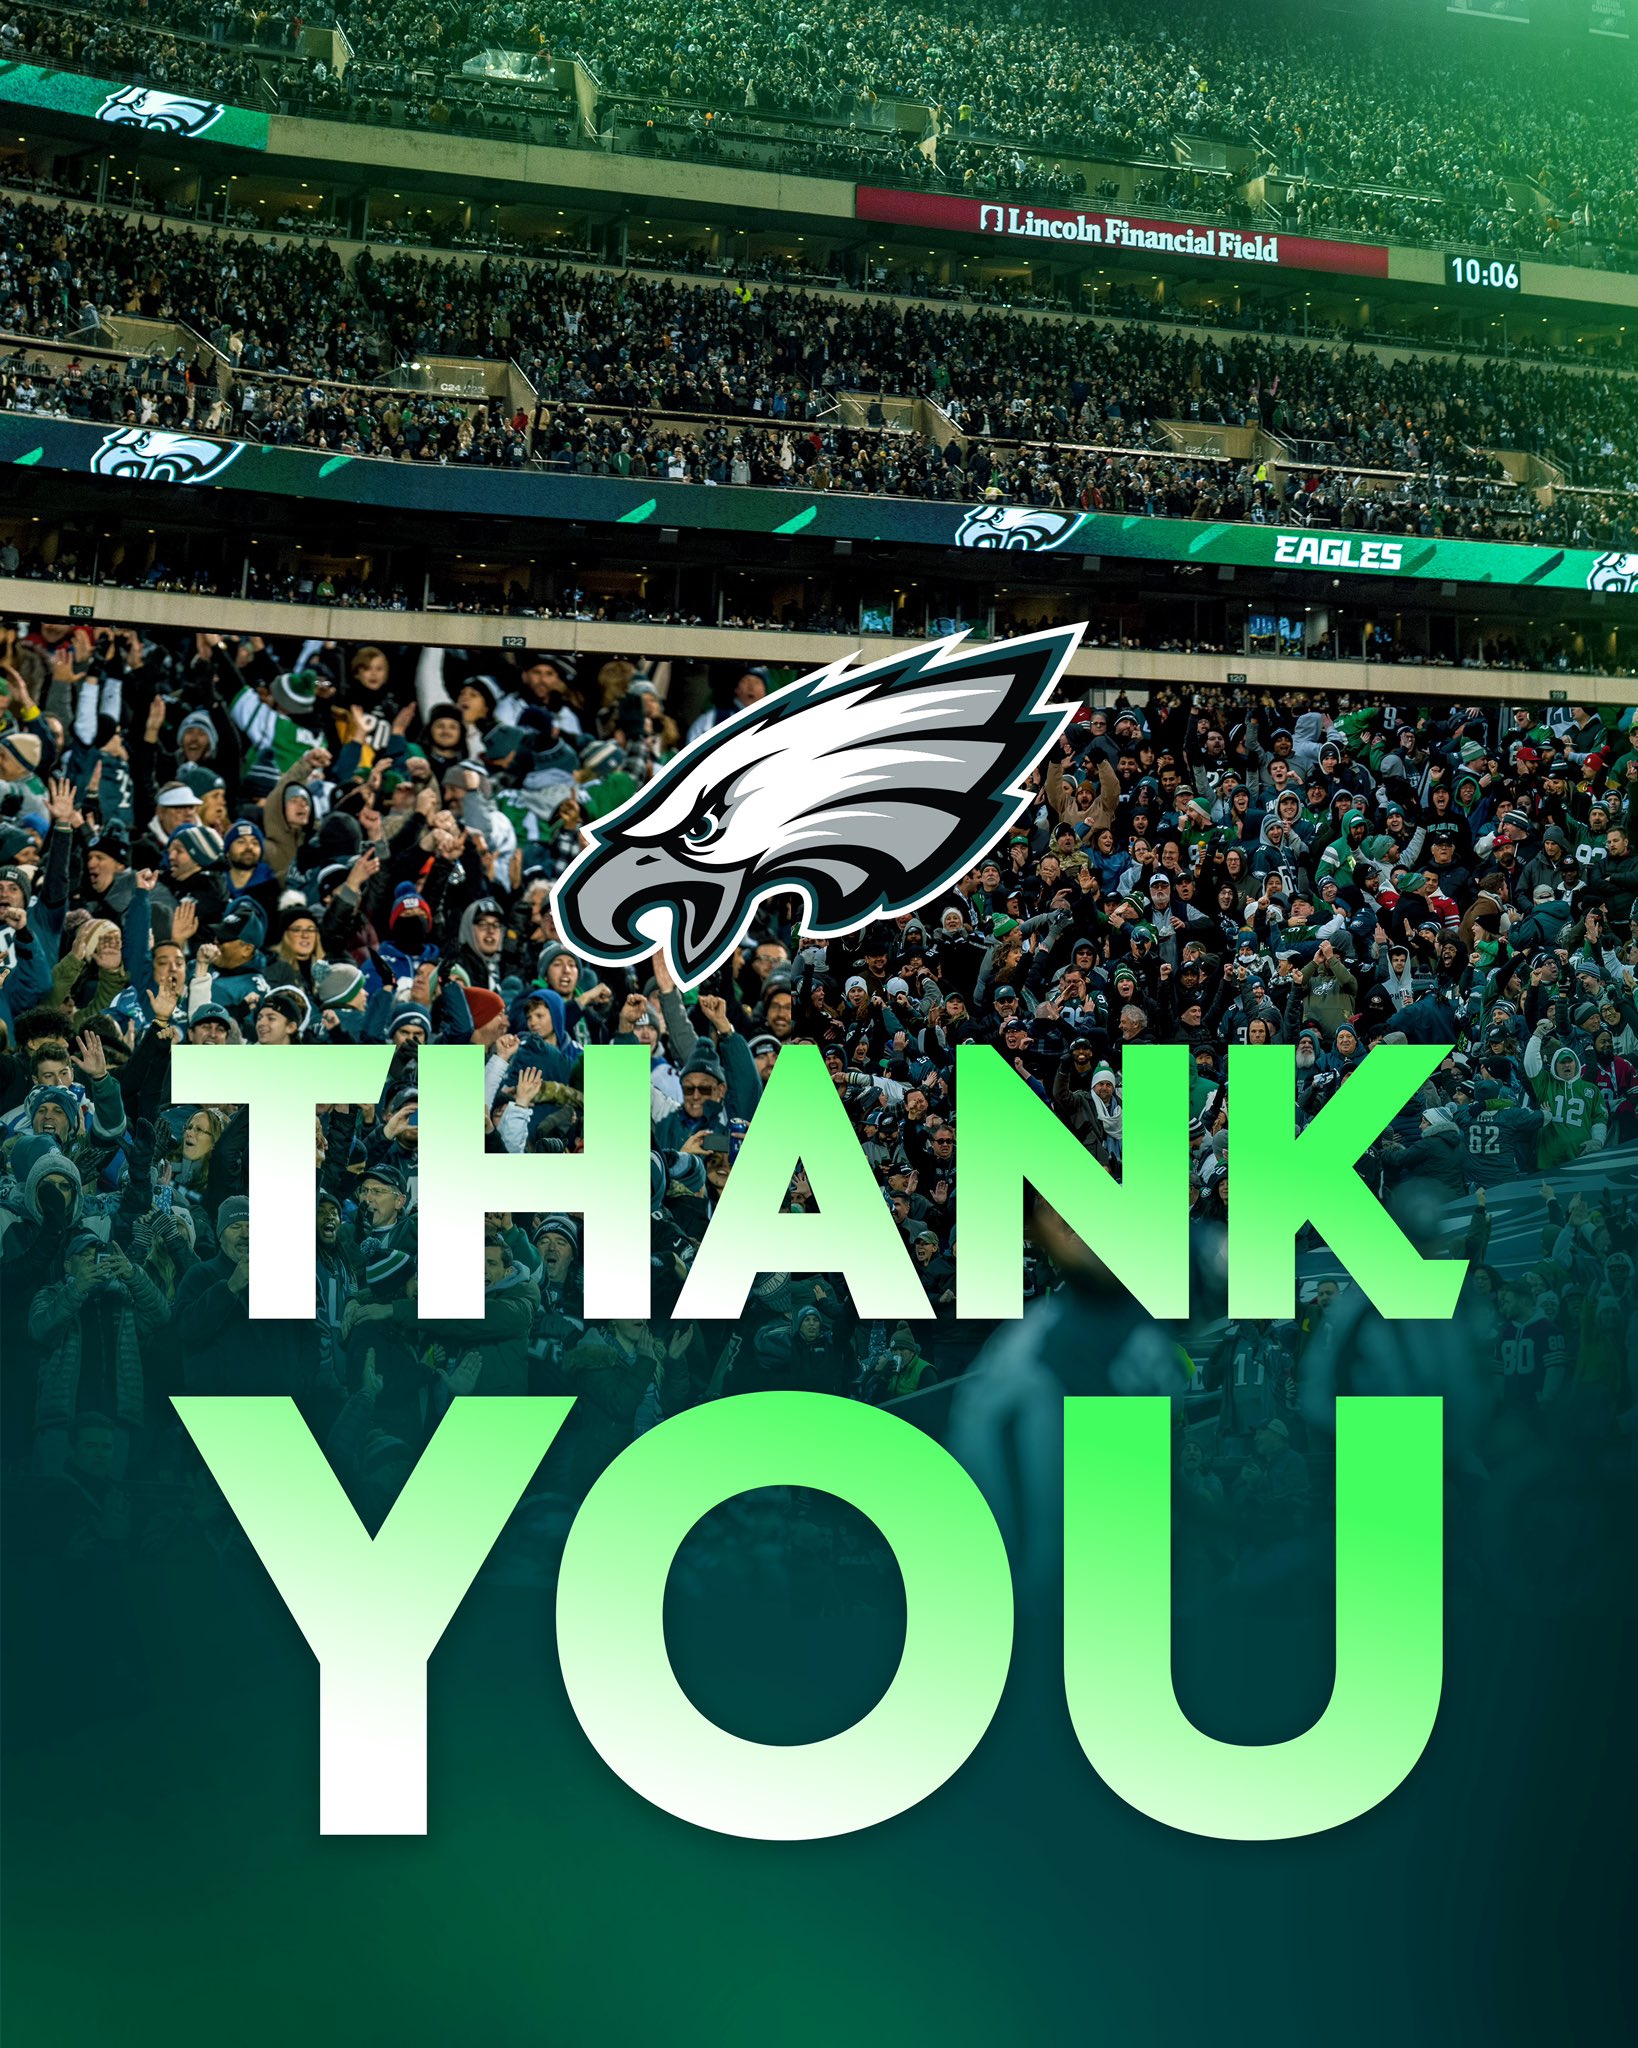 Megalopolis aktivt Gamle tider Philadelphia Eagles on Twitter: "To our fans, who were undefeated this  season – your passion, dedication, and support is unmatched. Thank you.  #ItsAPhillyThing https://t.co/OcPPVDMYkY" / Twitter